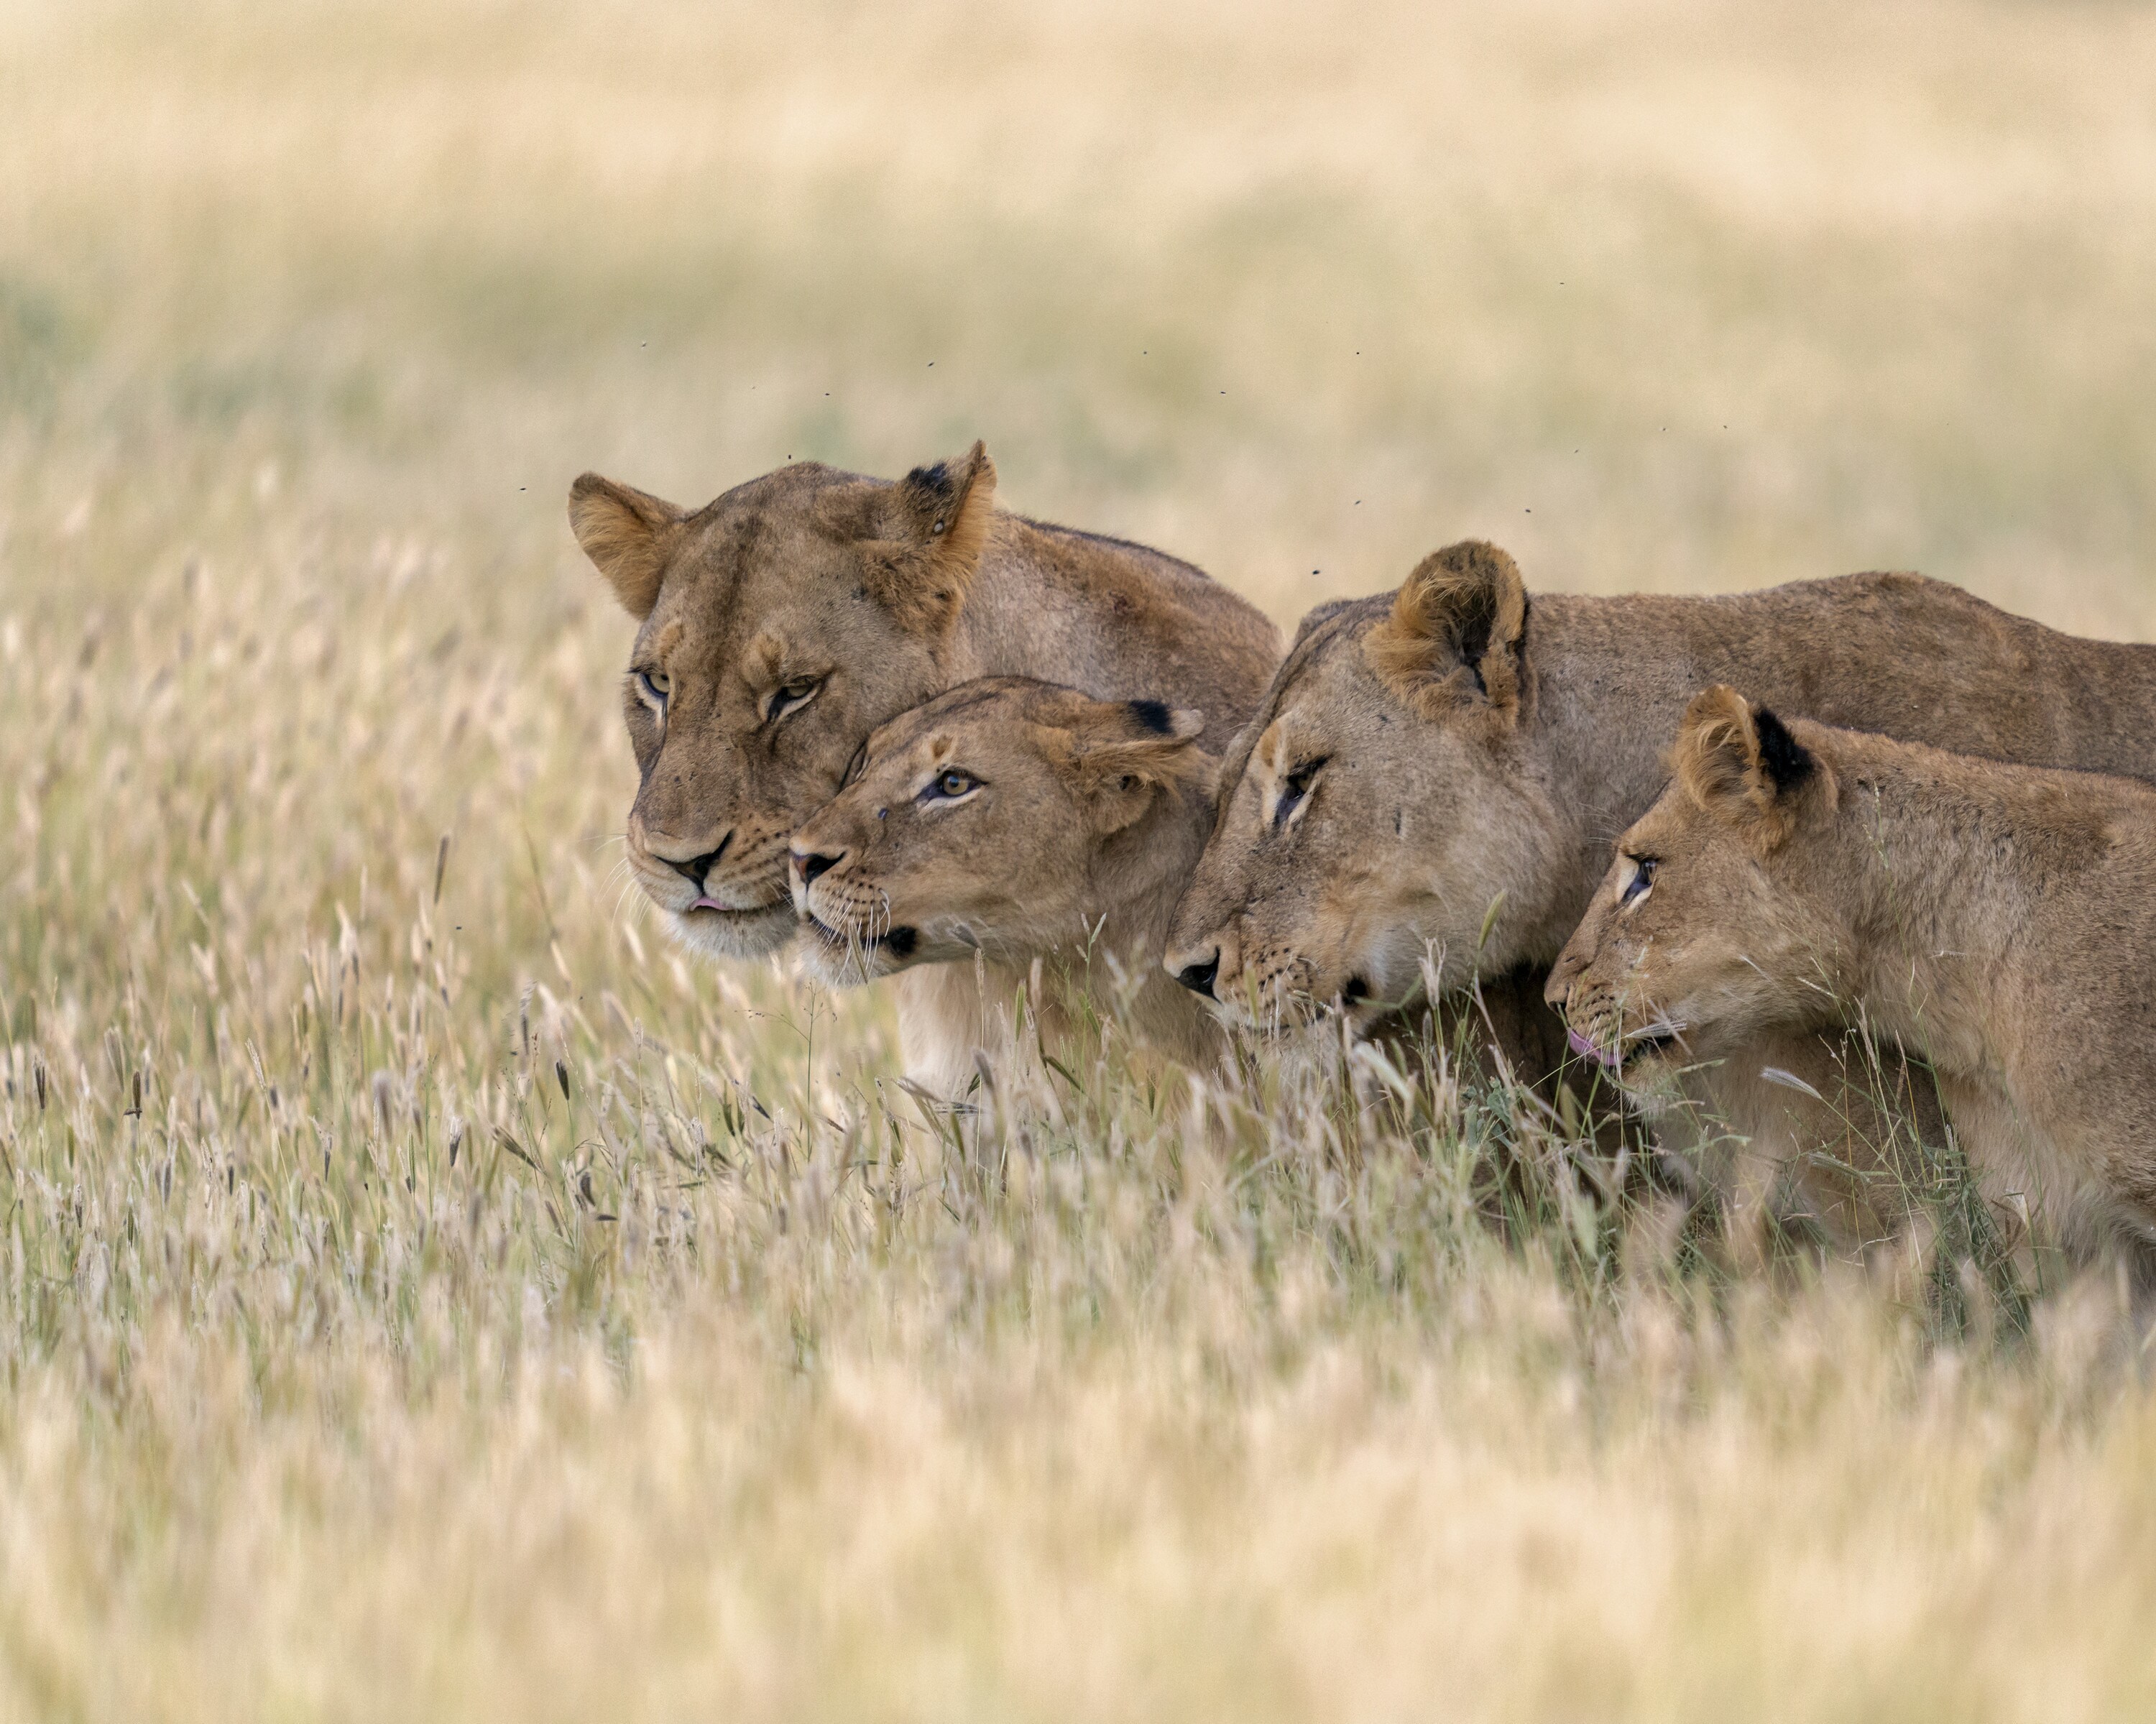 Malika, Ama and two cubs nuzzle one another. (National Geographic for Disney+/Russell MacLaughlin)